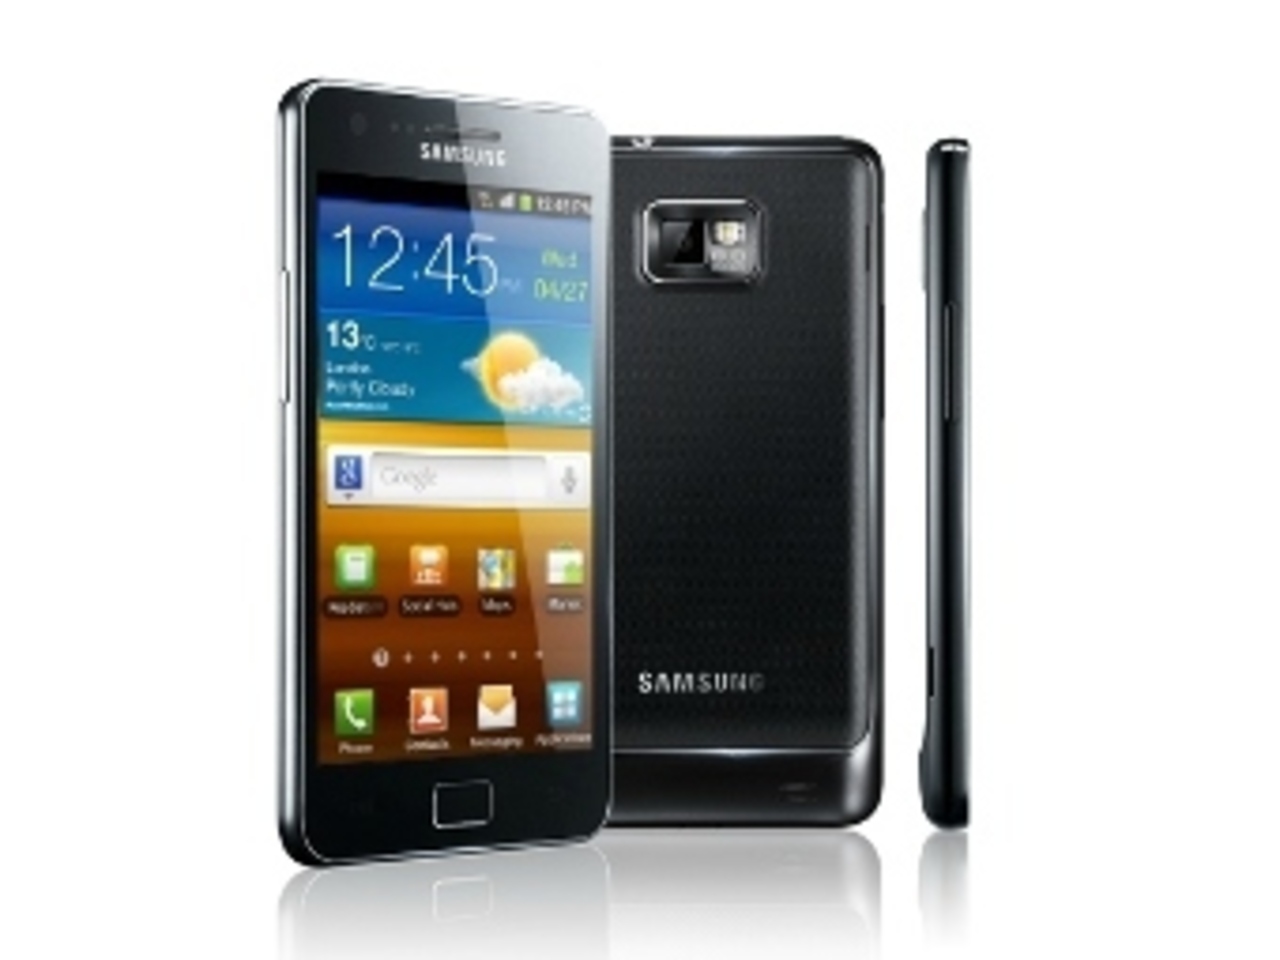 Samsung Galaxy S2 Jelly Bean Download Boost Mobile